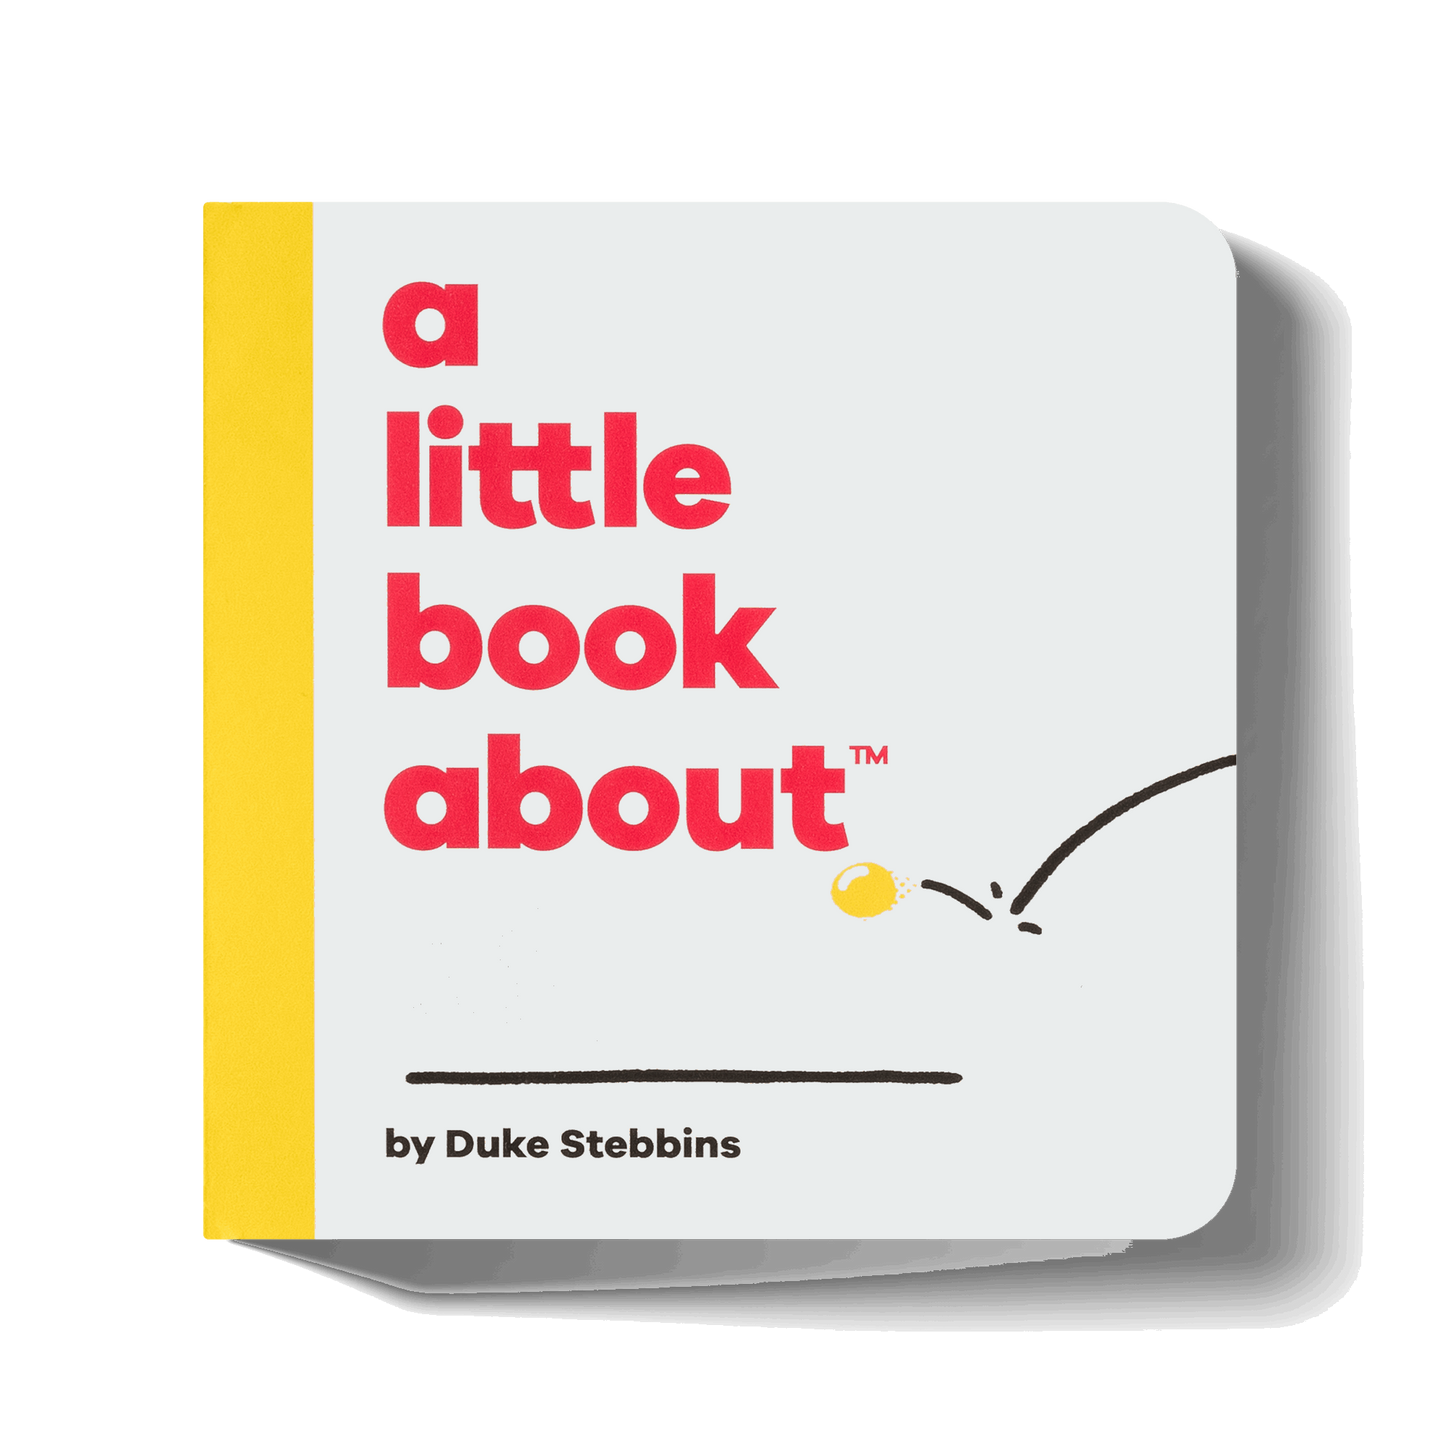 A Little Book About Sharing